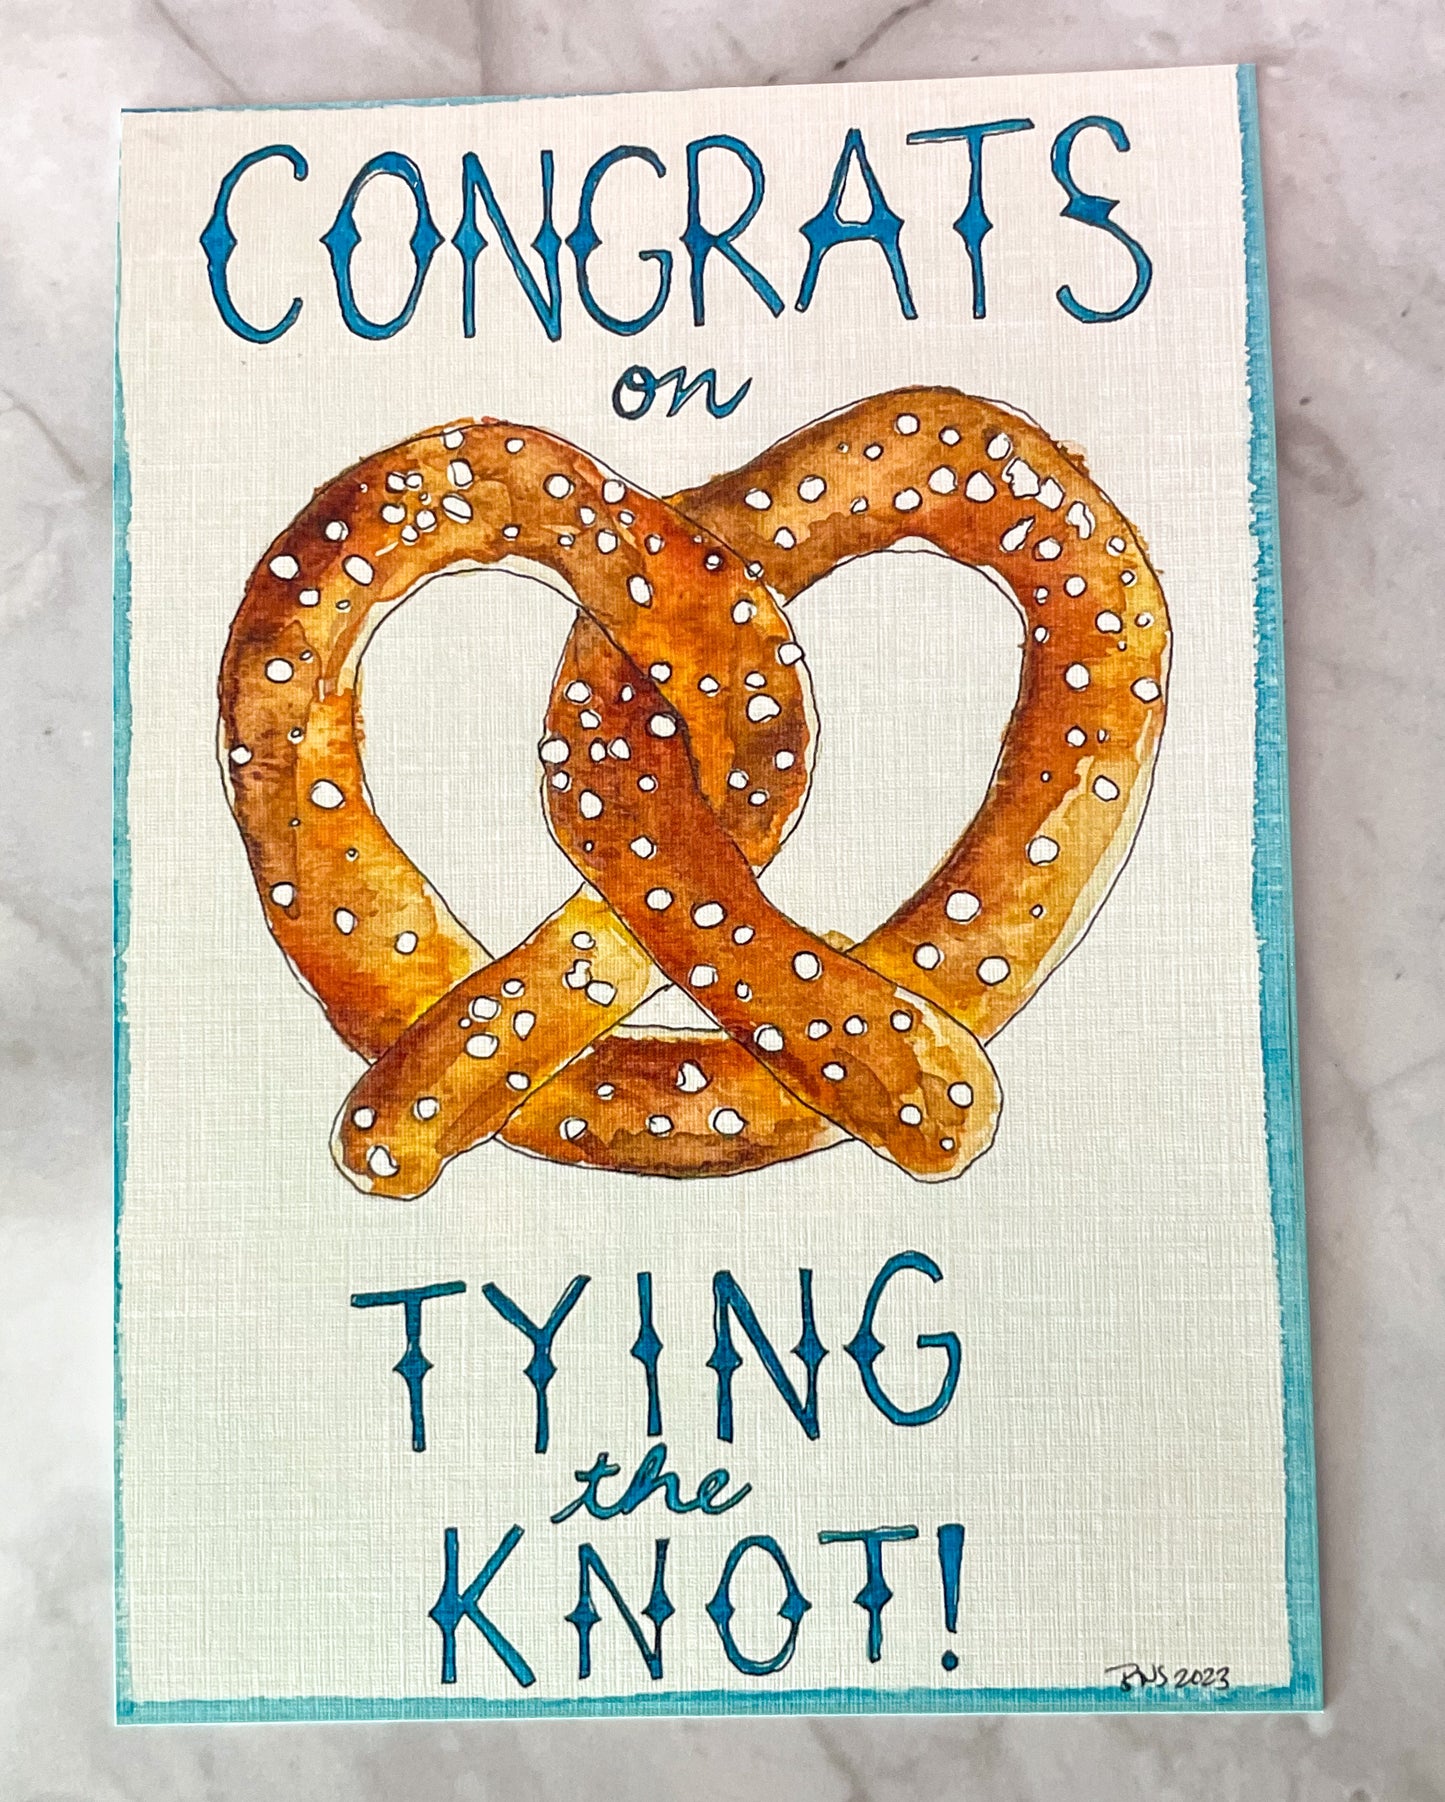 Congrats on Tying the Knot Card